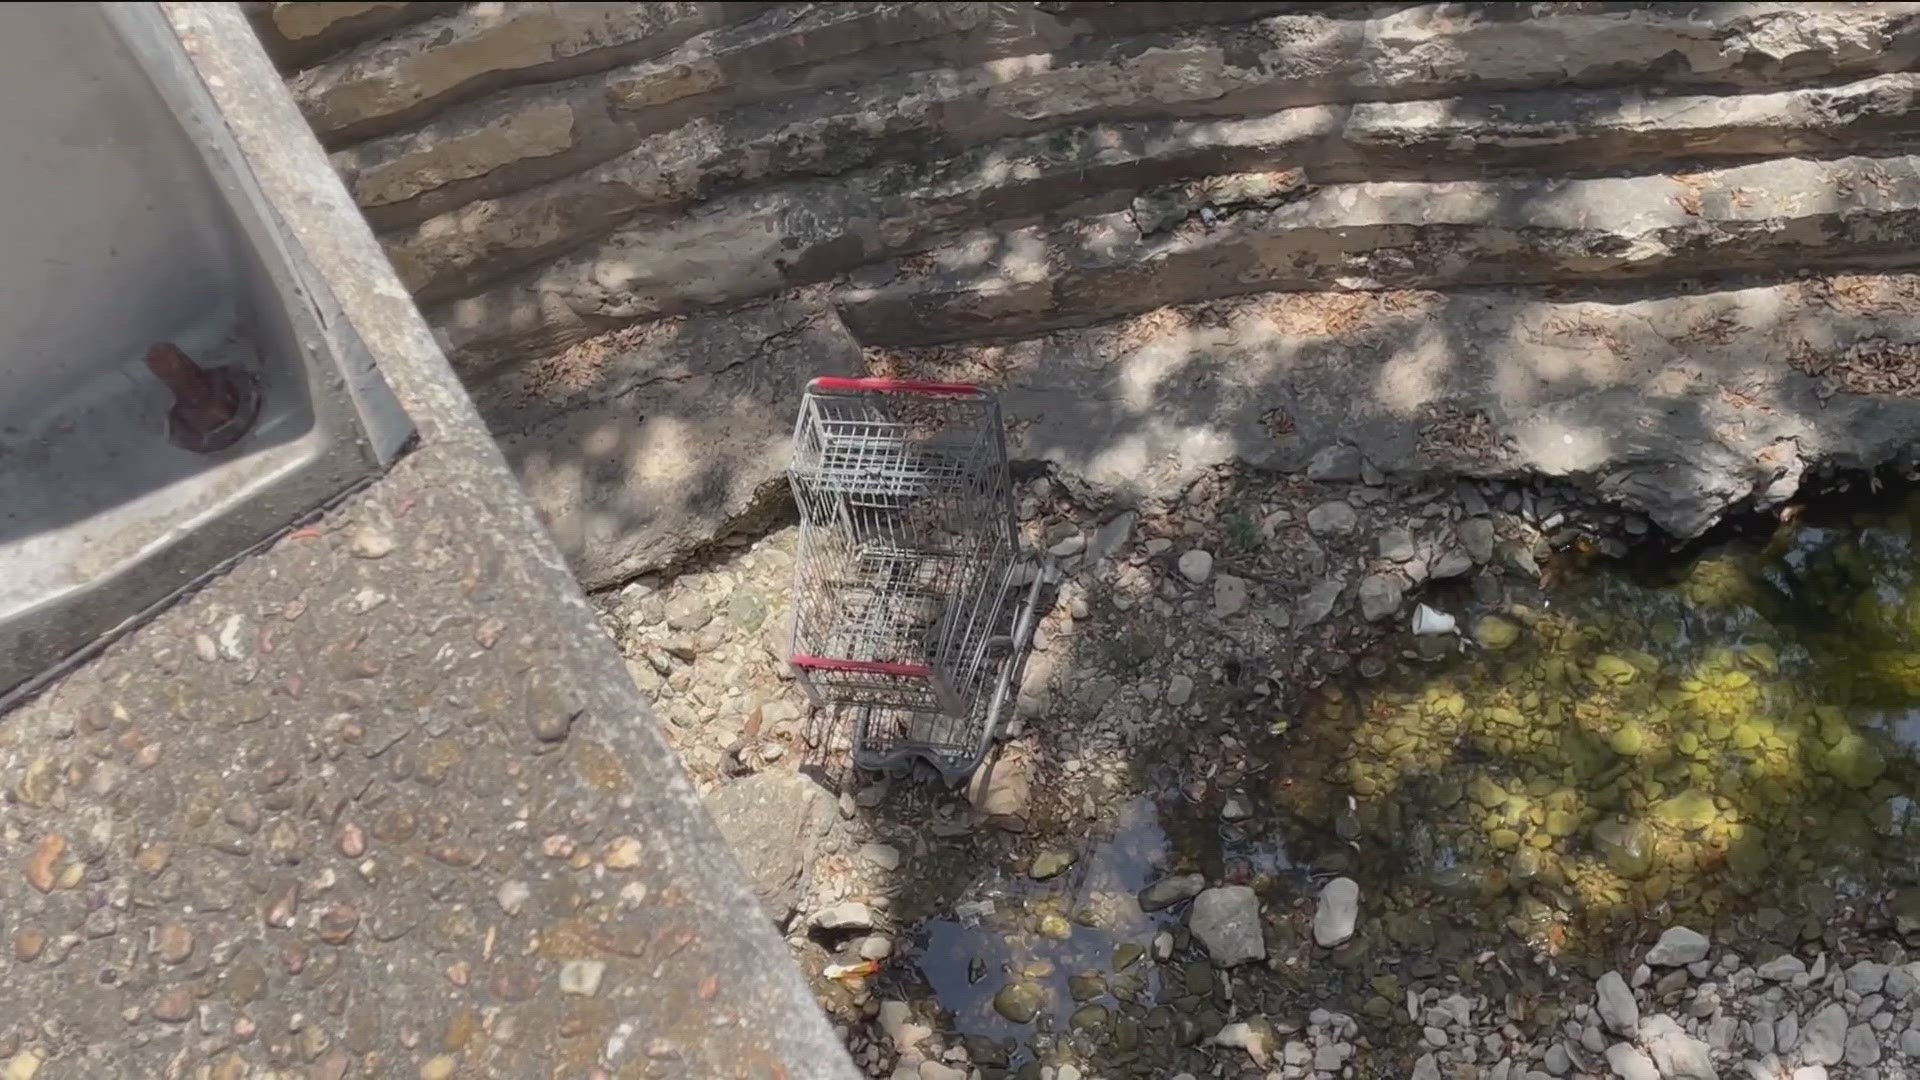 Shopping carts are among some of the items clogging and dirtying up the 11-mile creek.